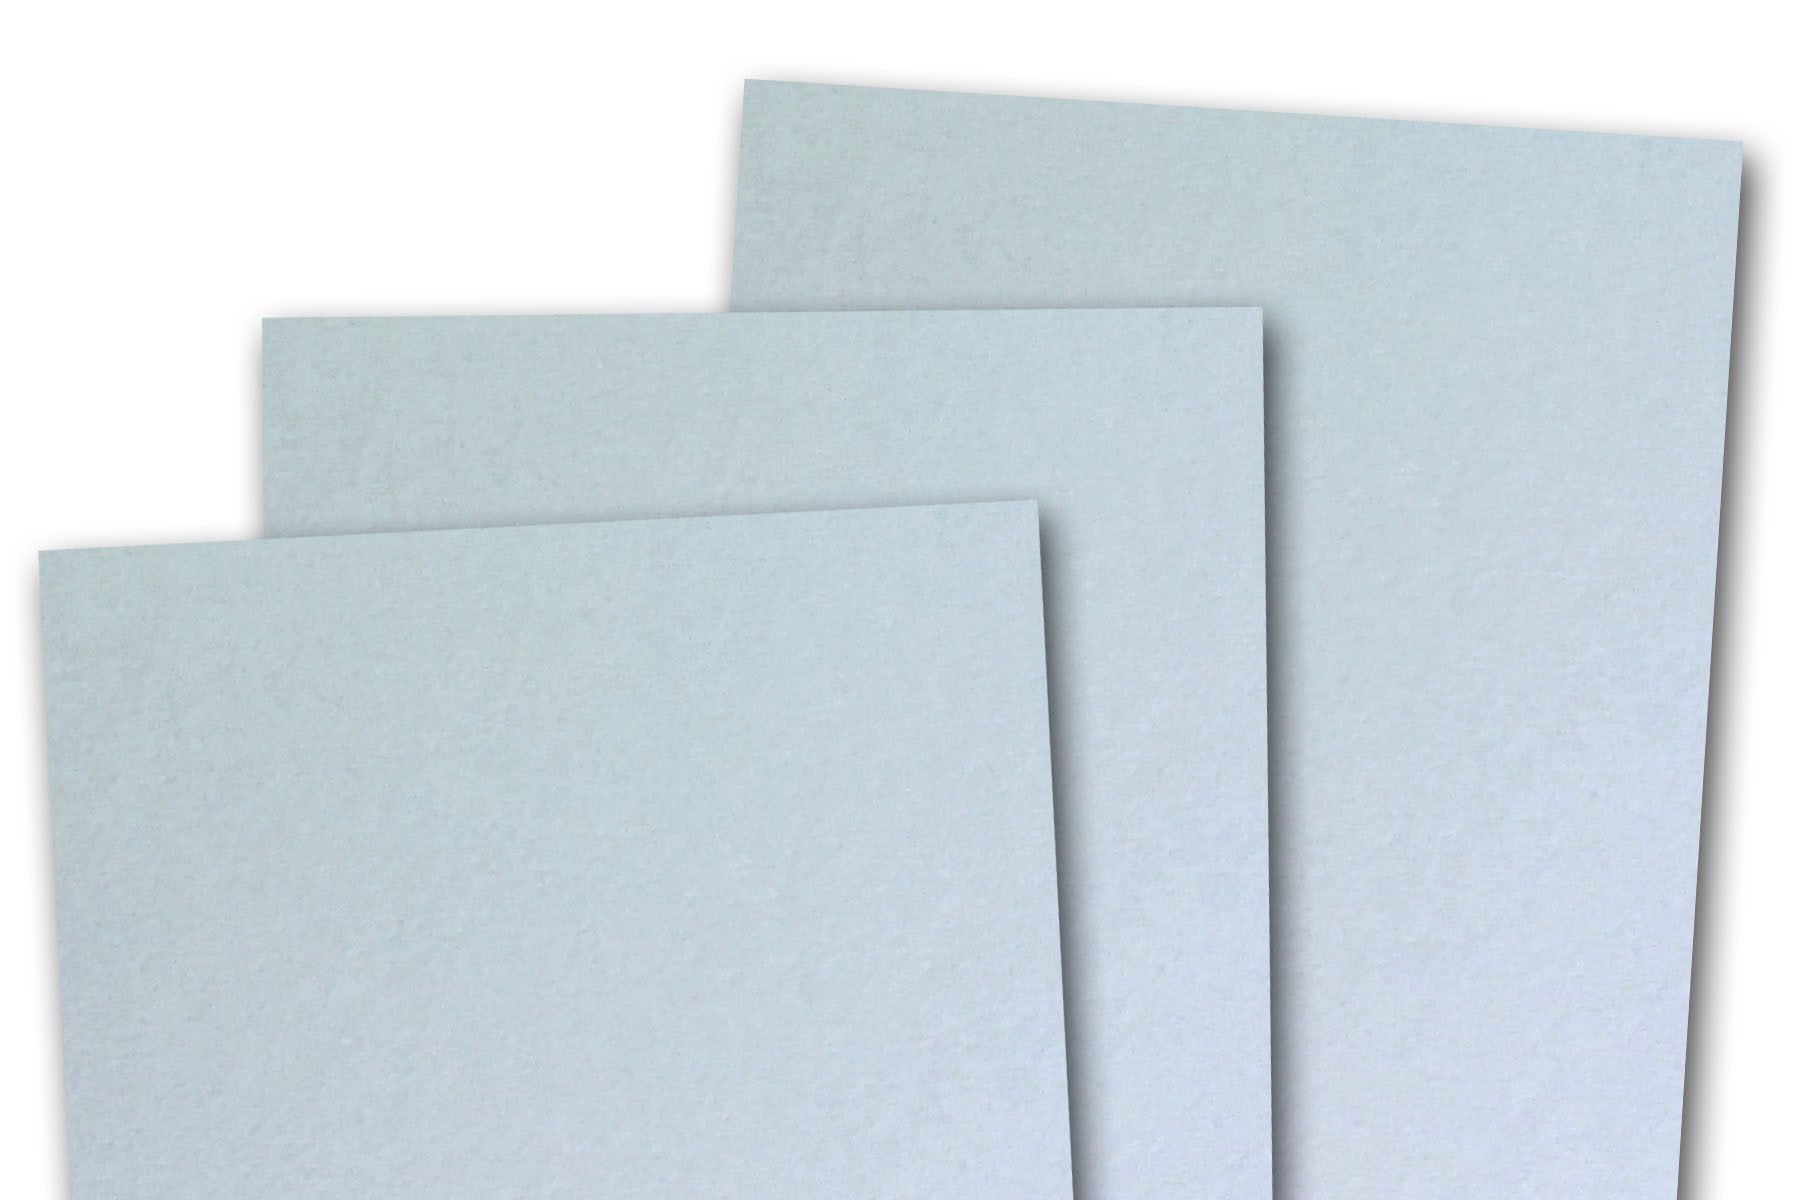 Clearance] BASIS COLORS - 8.5 x 11 CARDSTOCK PAPER - Blue - 80LB